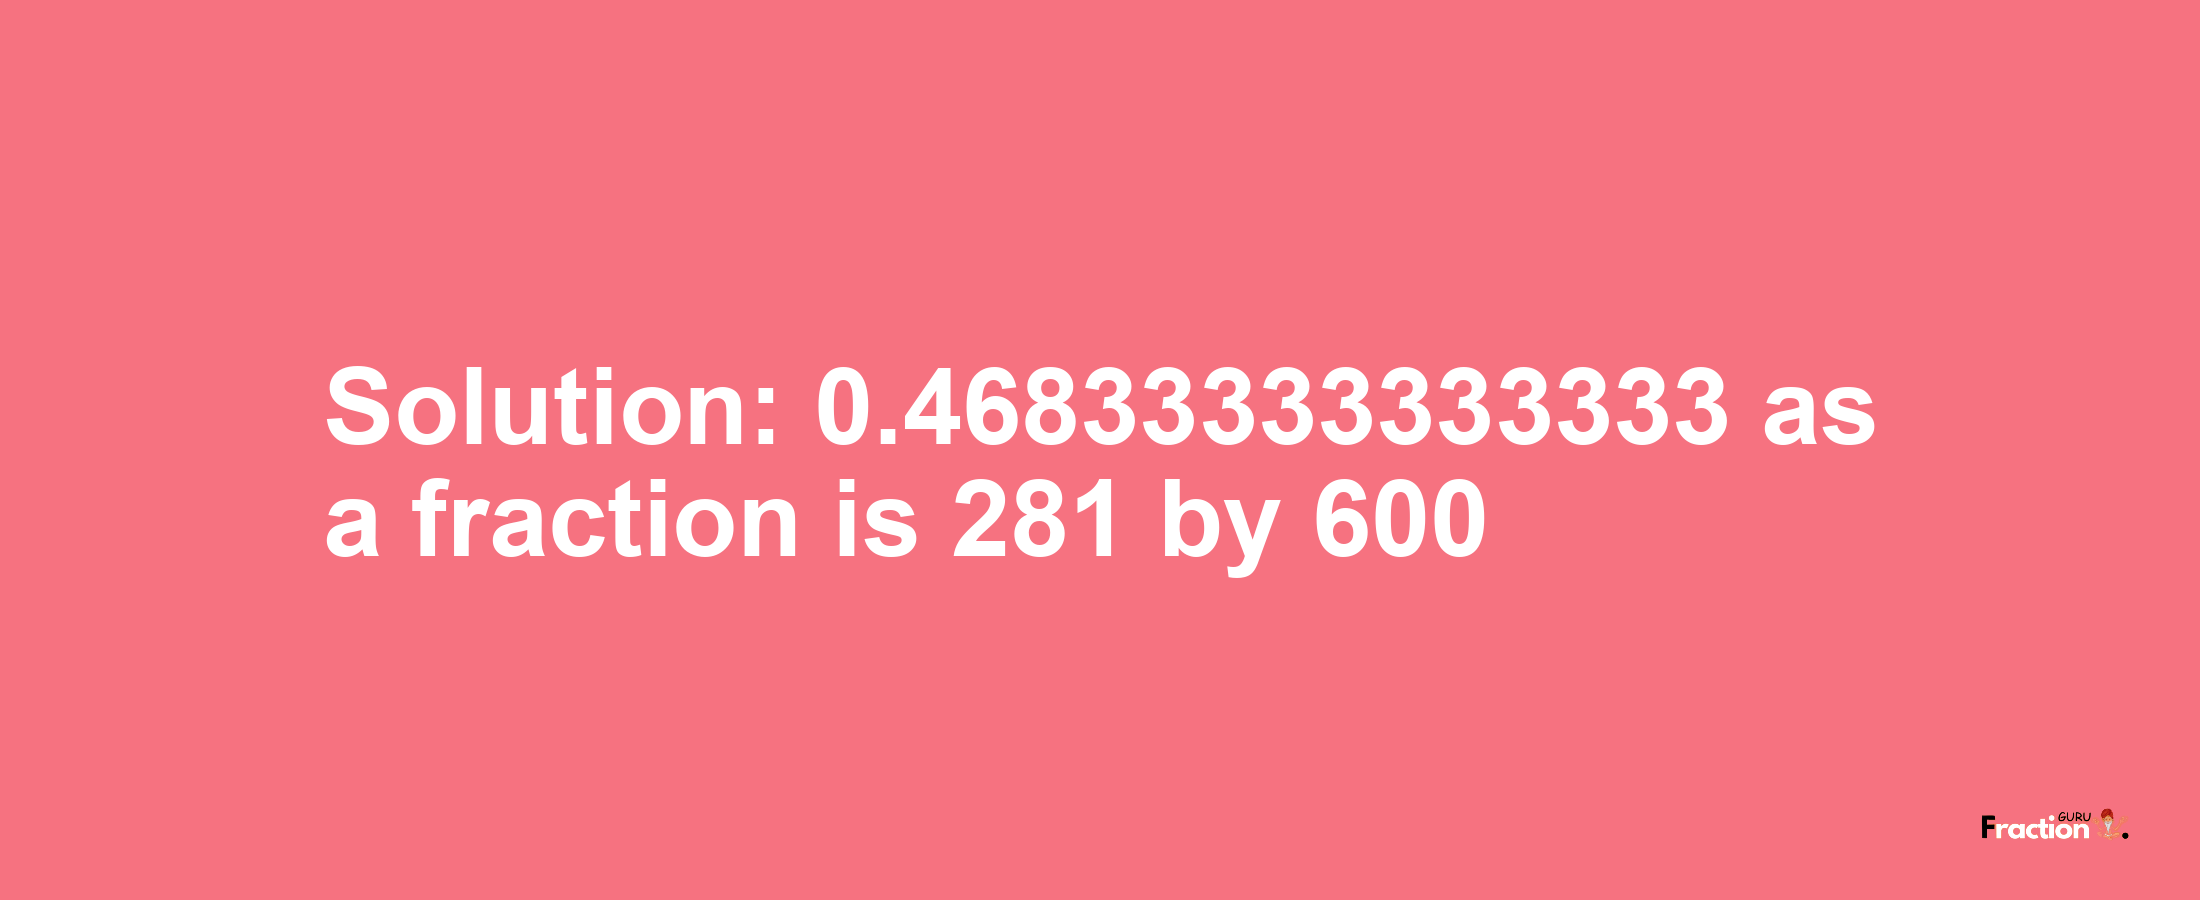 Solution:0.46833333333333 as a fraction is 281/600